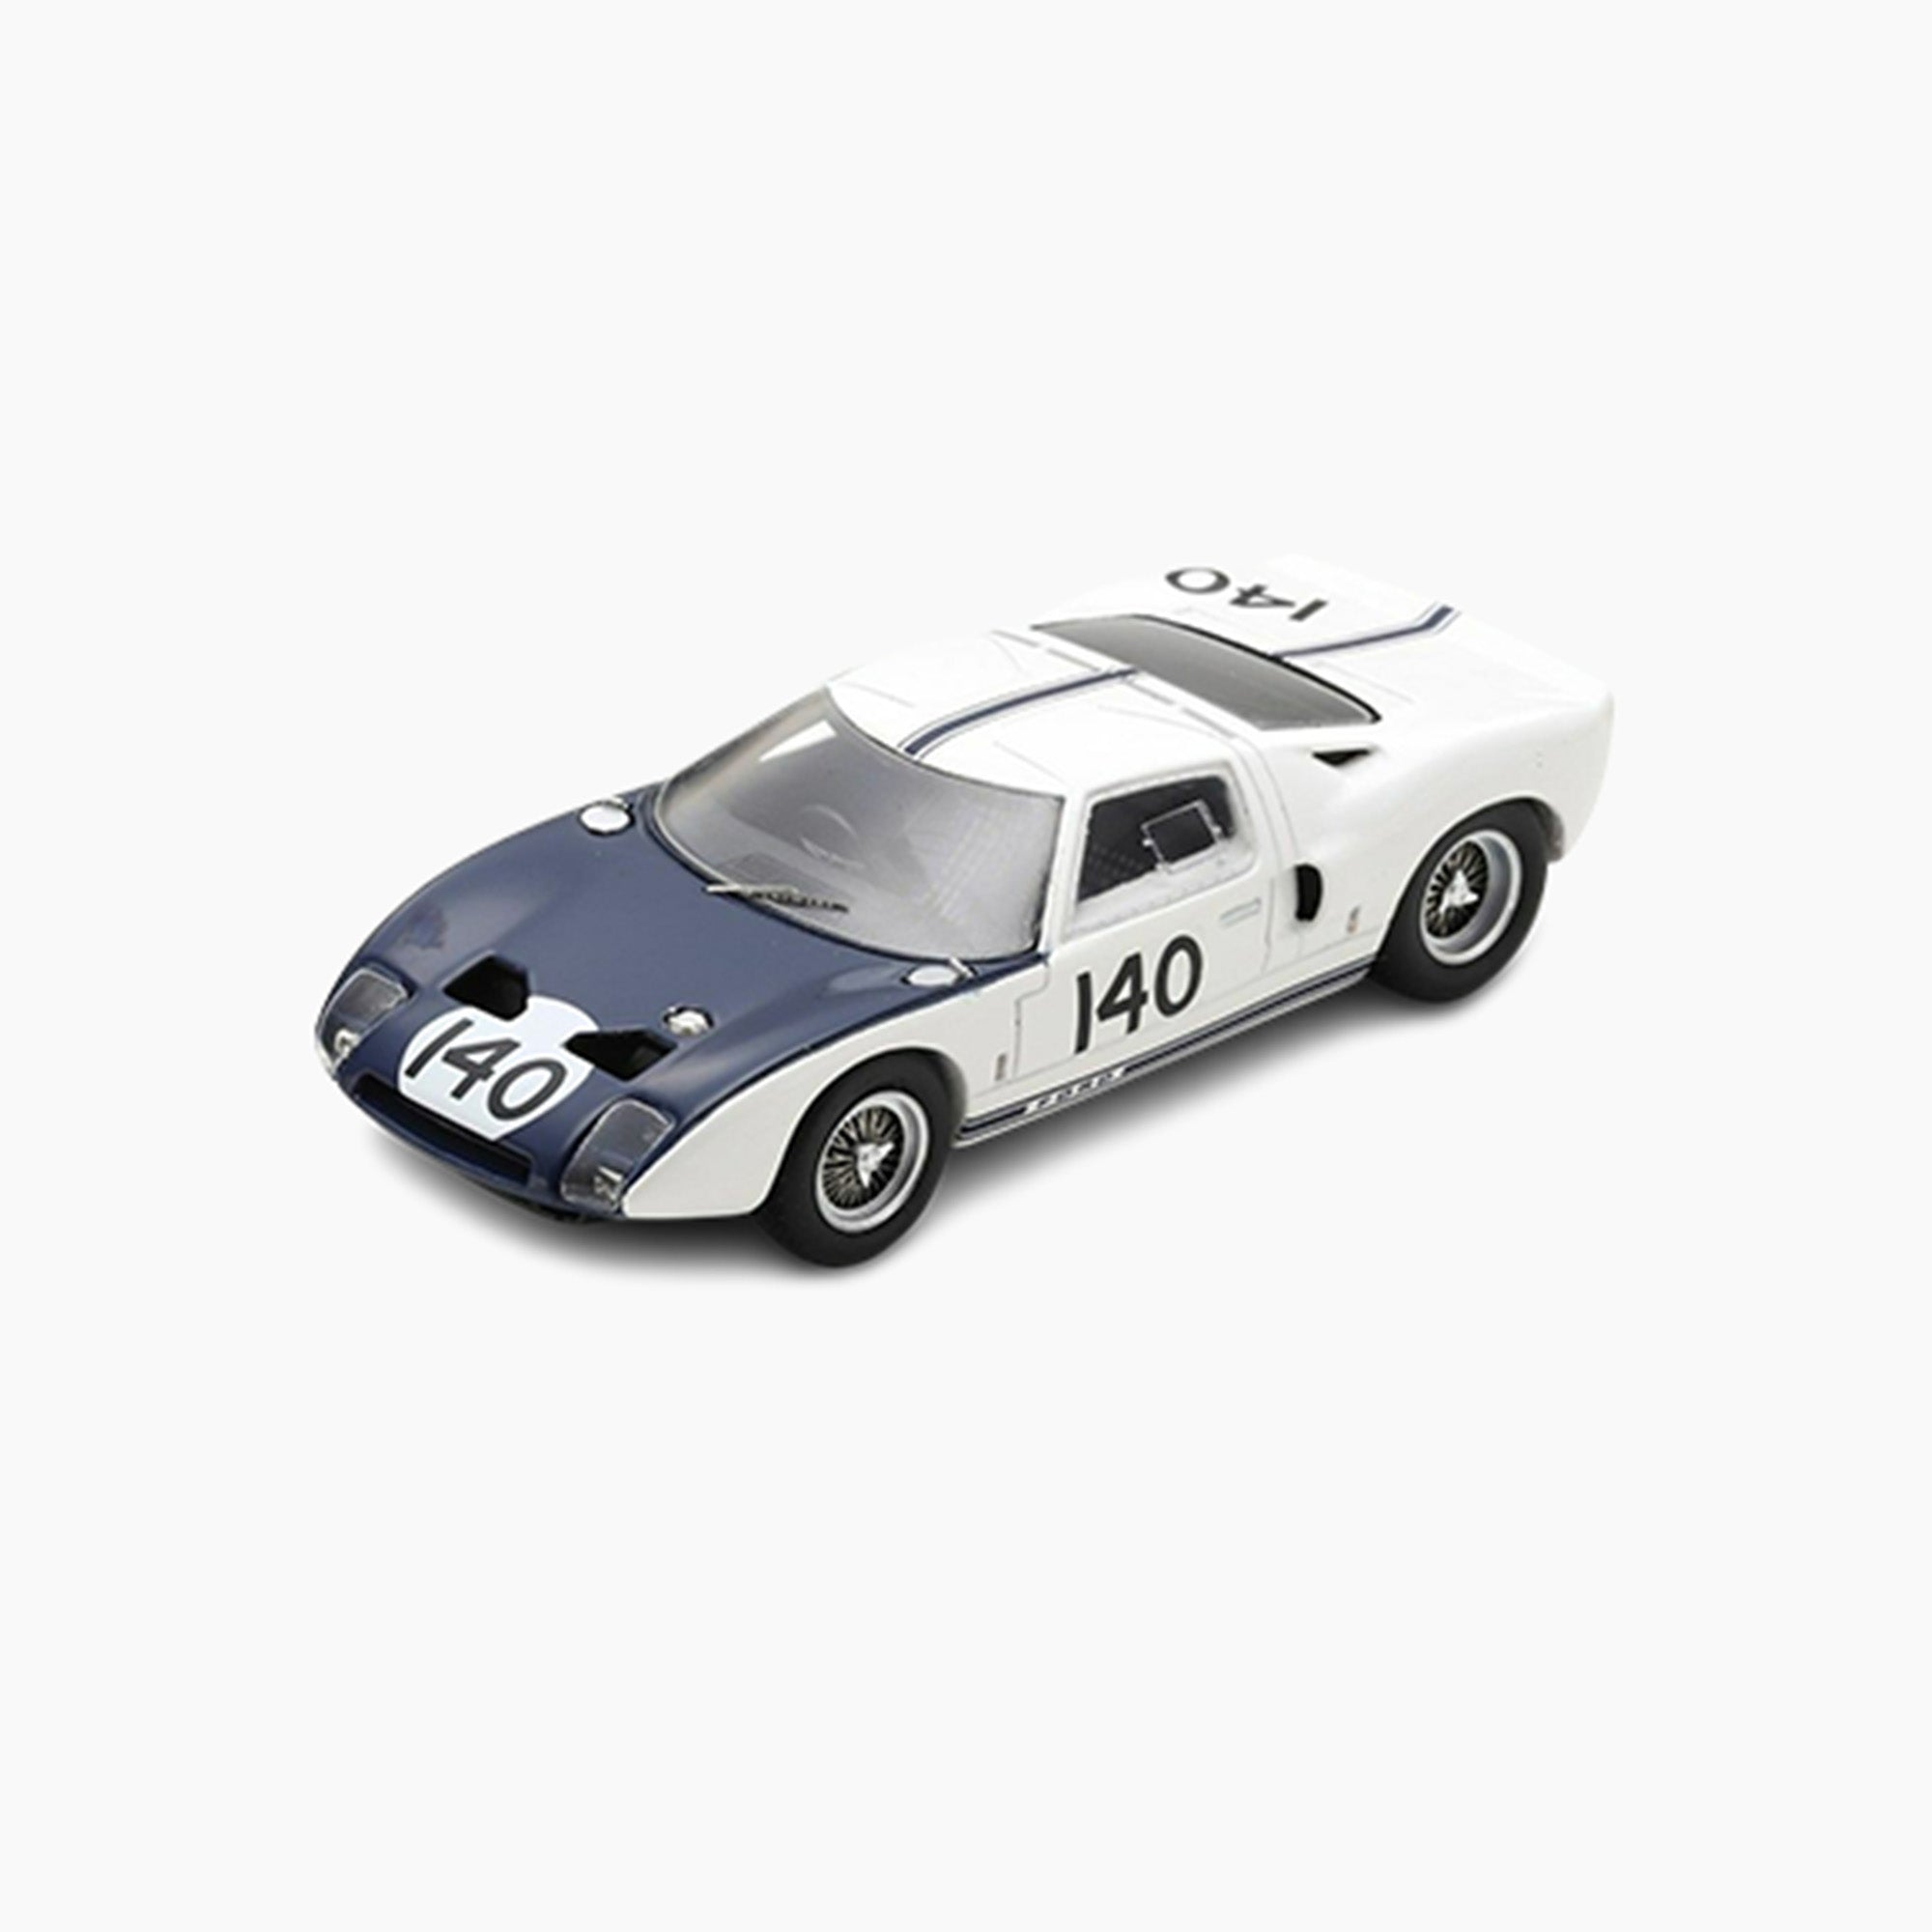 Ford GT No.140 1000km of Nürburgring 1964 | 1:43 Scale Model-1:43 Scale Model-Spark Models-gpx-store